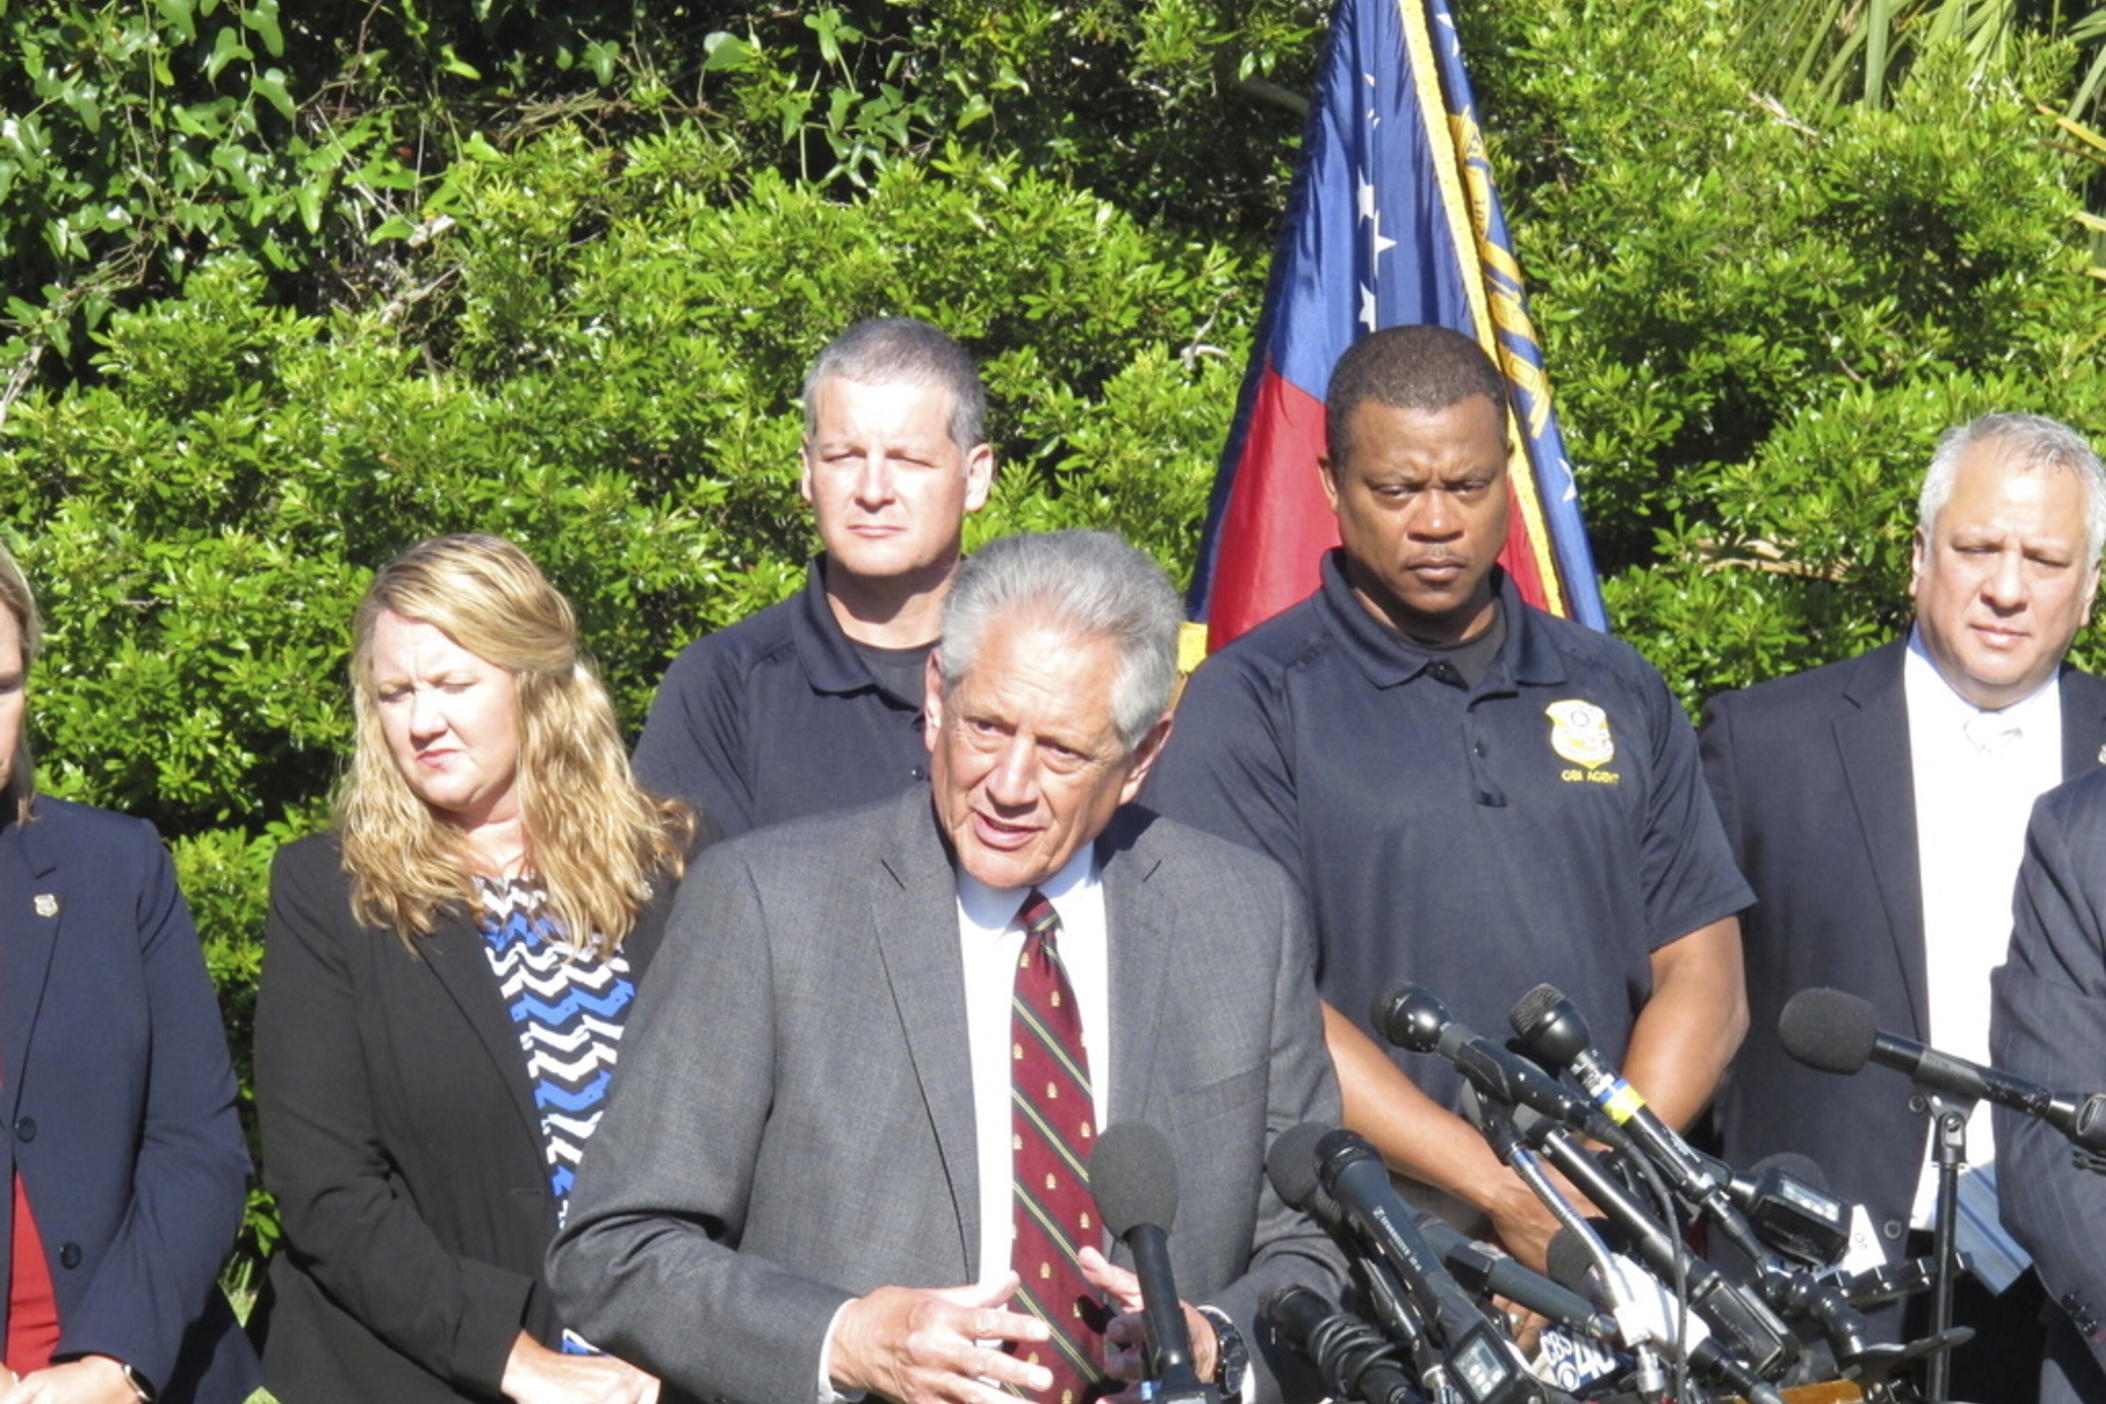 District Attorney Tom Durden of Georgia's Atlantic Judicial Circuit speaks at a news conference, May 8, 2020, in Brunswick, Georgia, about the killing of Ahmaud Arbery. Durden, the longtime prosecutor who won convictions in Georgia's infamous “tomato patch” killing and called in state investigators to build a case against the men who killed Ahmaud Arbery has died. Durden was 66.